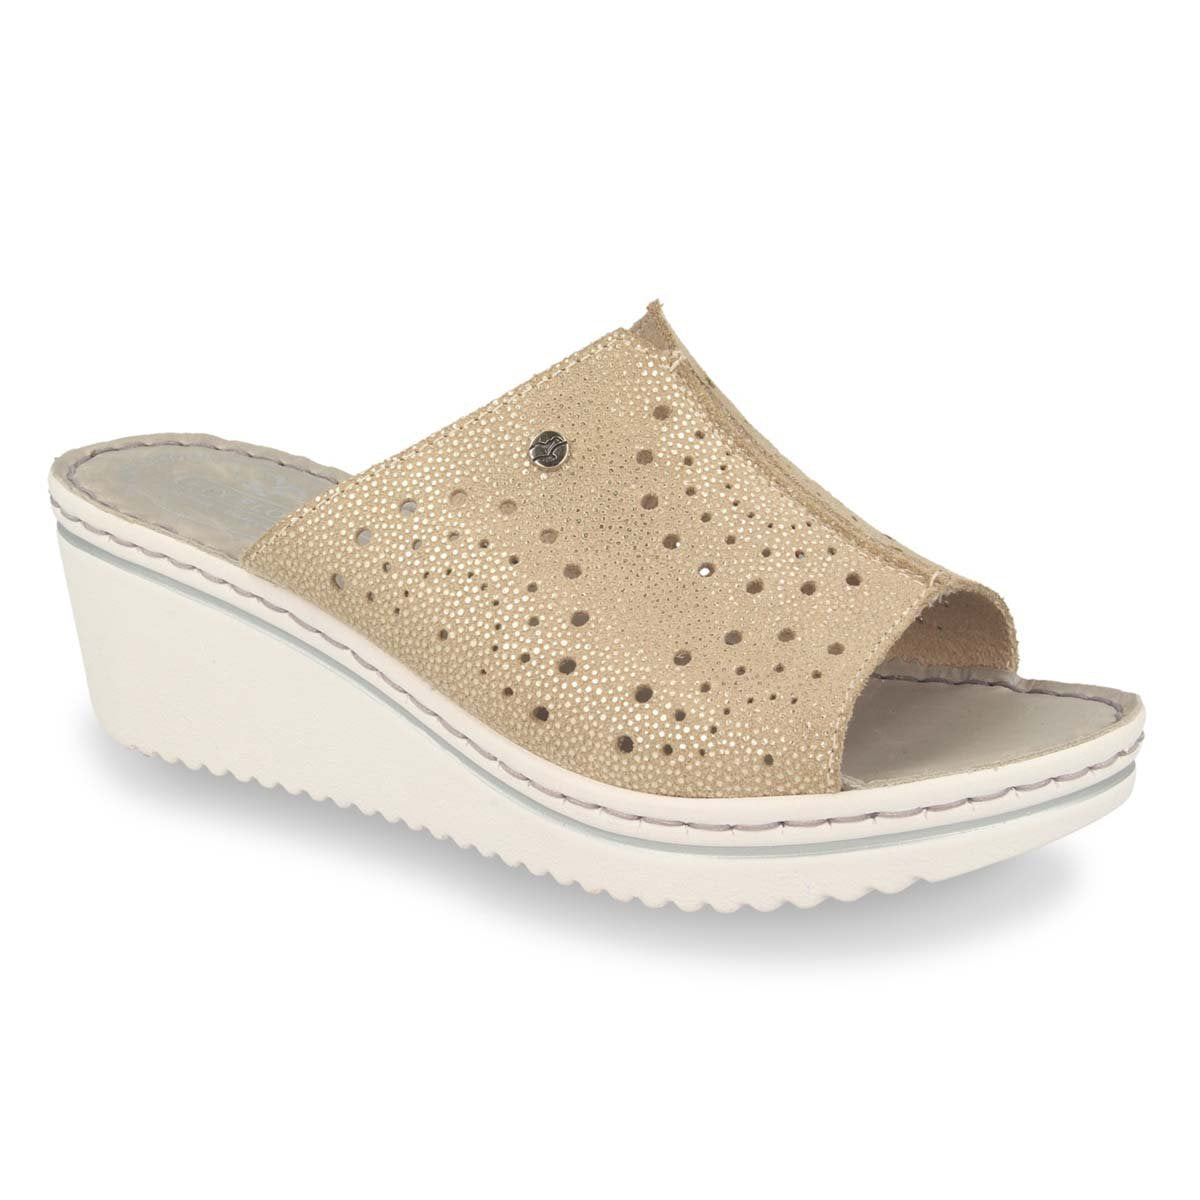 See the Trendy Wedge With Anti-Shock Cushioned Leather Insole in the colour BEIGE, available in various sizes